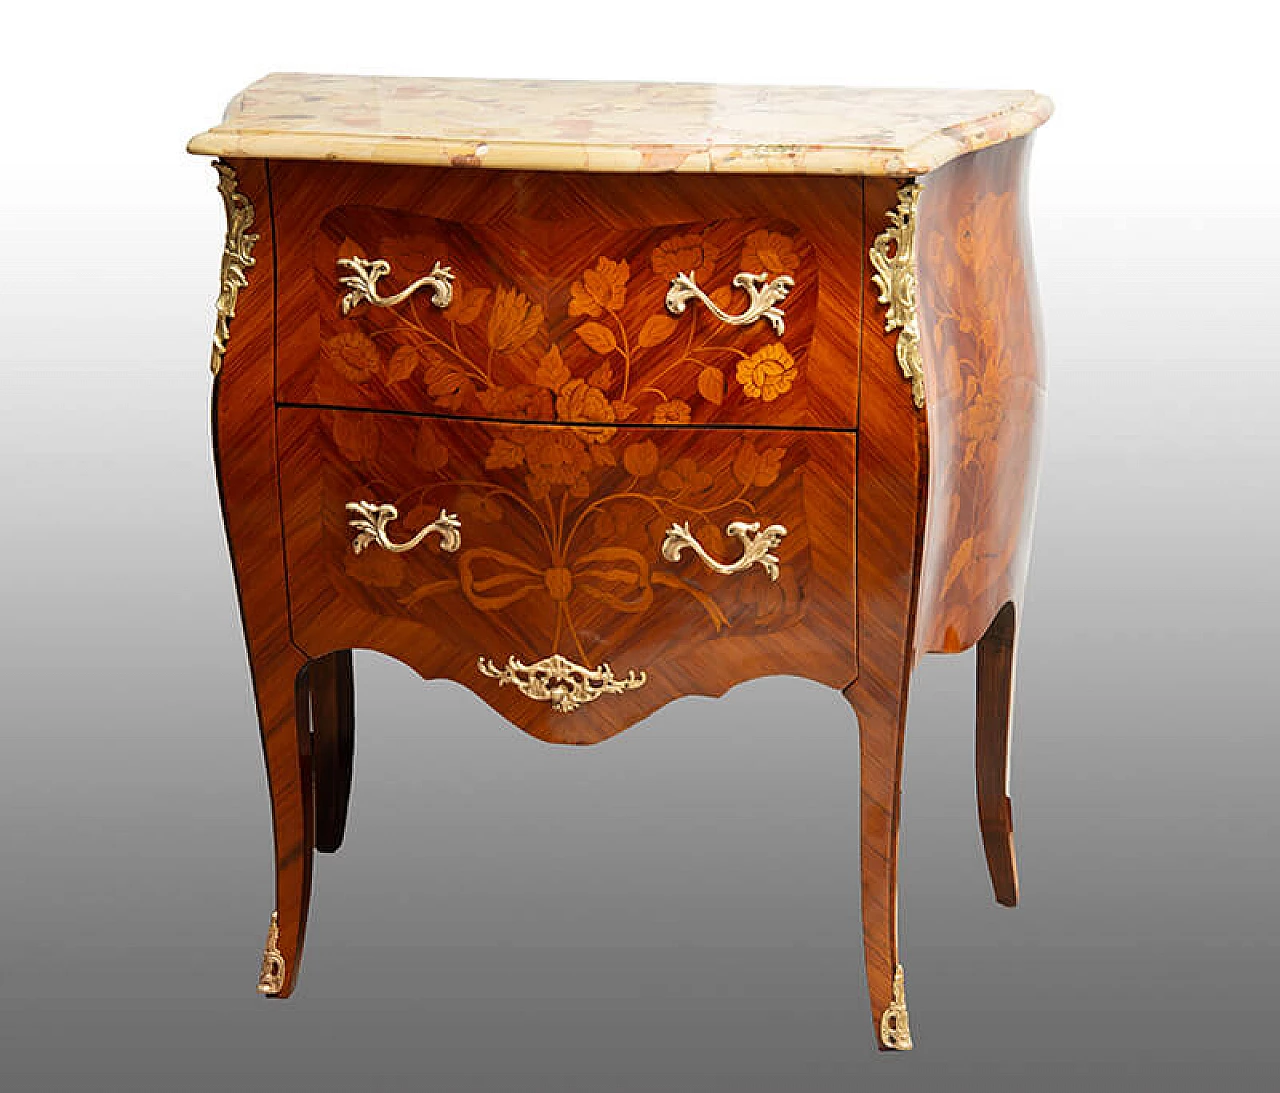 Napoleon III style bedside table in exotic fine wood, 19th century 1